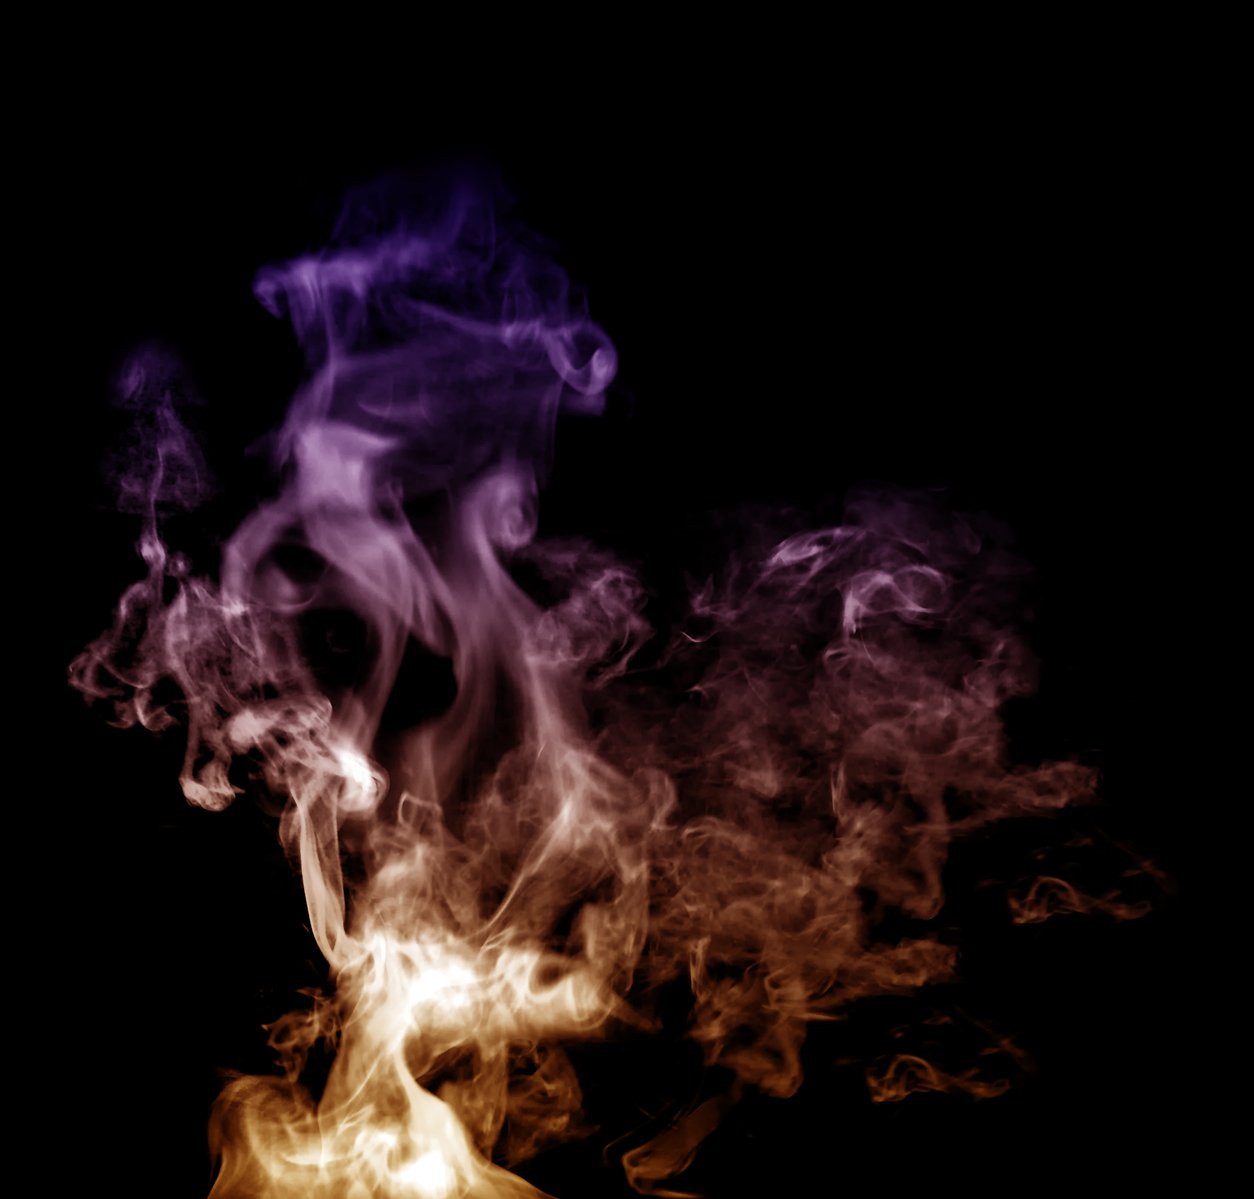 purple and yellow flames against a black background